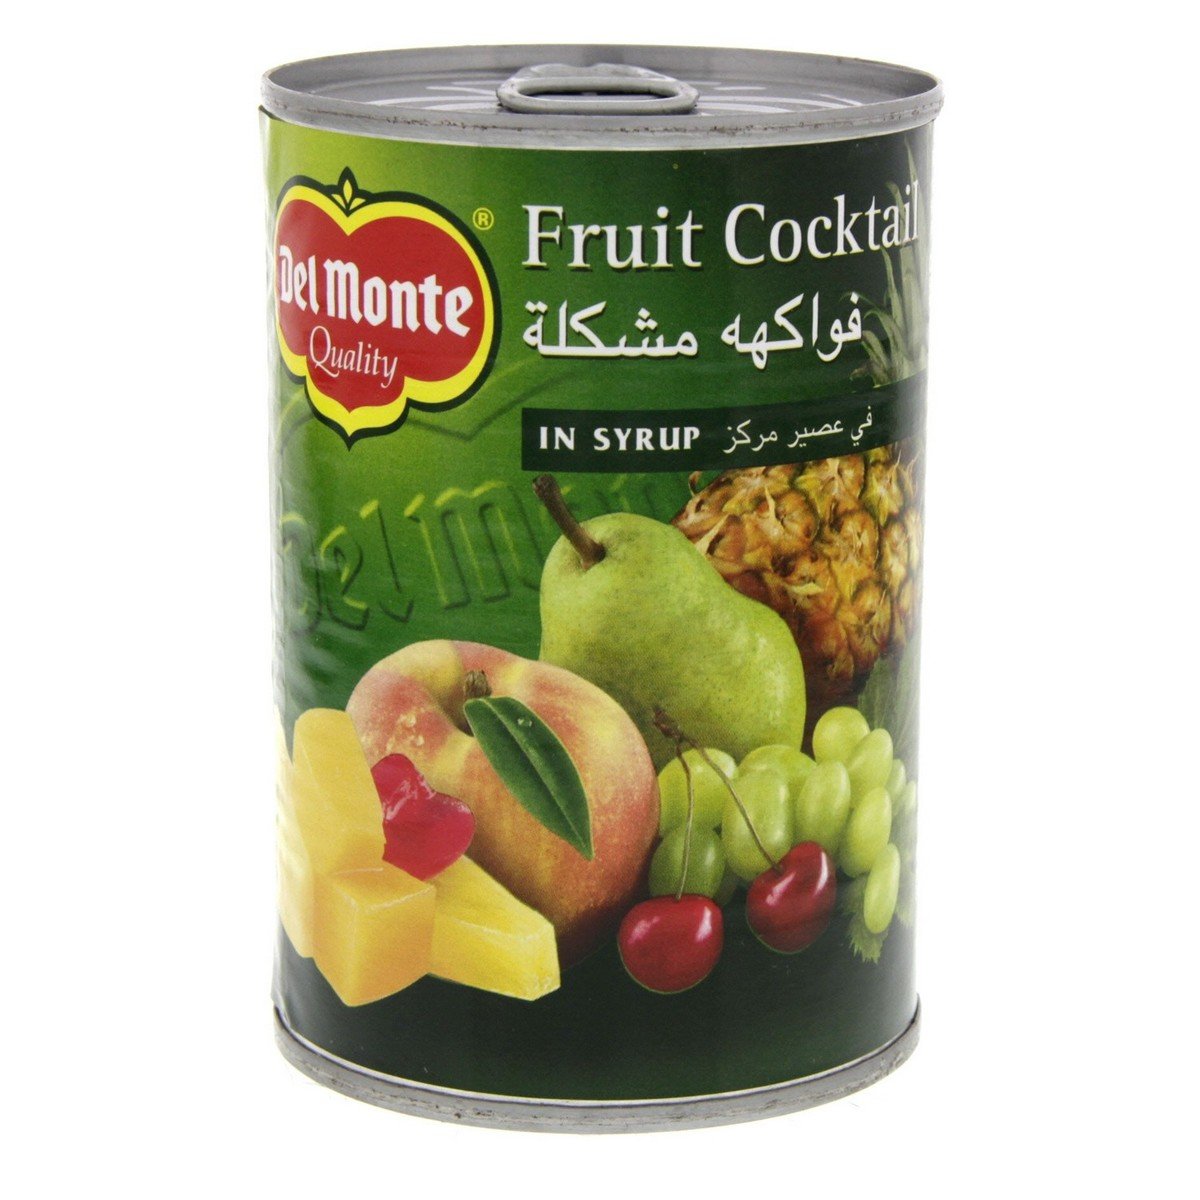 Delmonte Fruit Cocktail In Syrup 420g